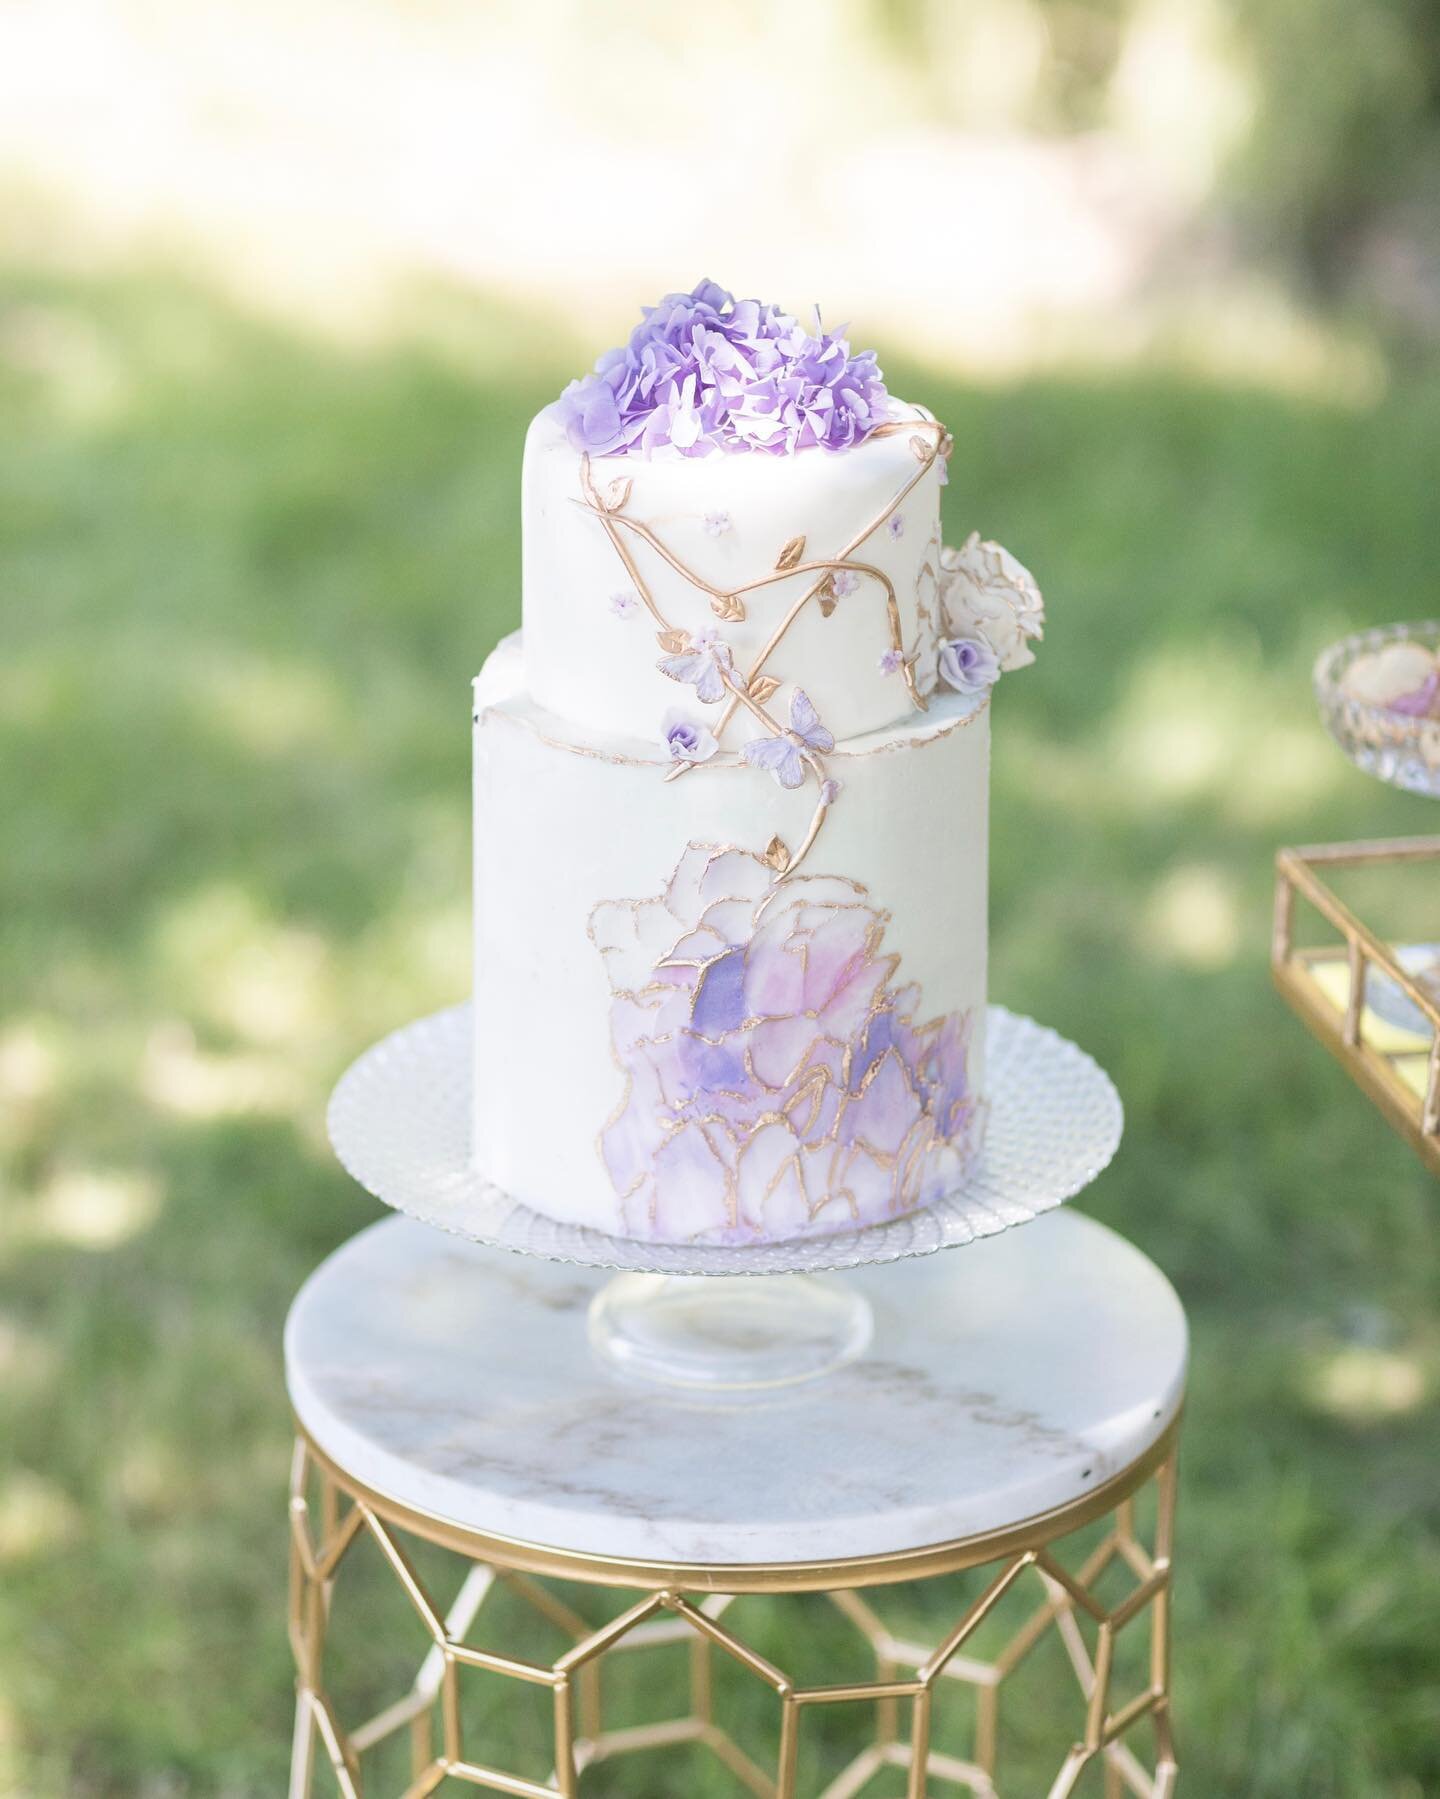 All in the details 💜 we have a wide range of beautiful and unique cake stands!

Photographer @warinmariephotographyPlanner @candacestyles
Cake + Desserts @cakesbyshab 
Decor @ellssievents
Venue @alpacaacresbc&nbsp;

#maternityphotography #maternitys